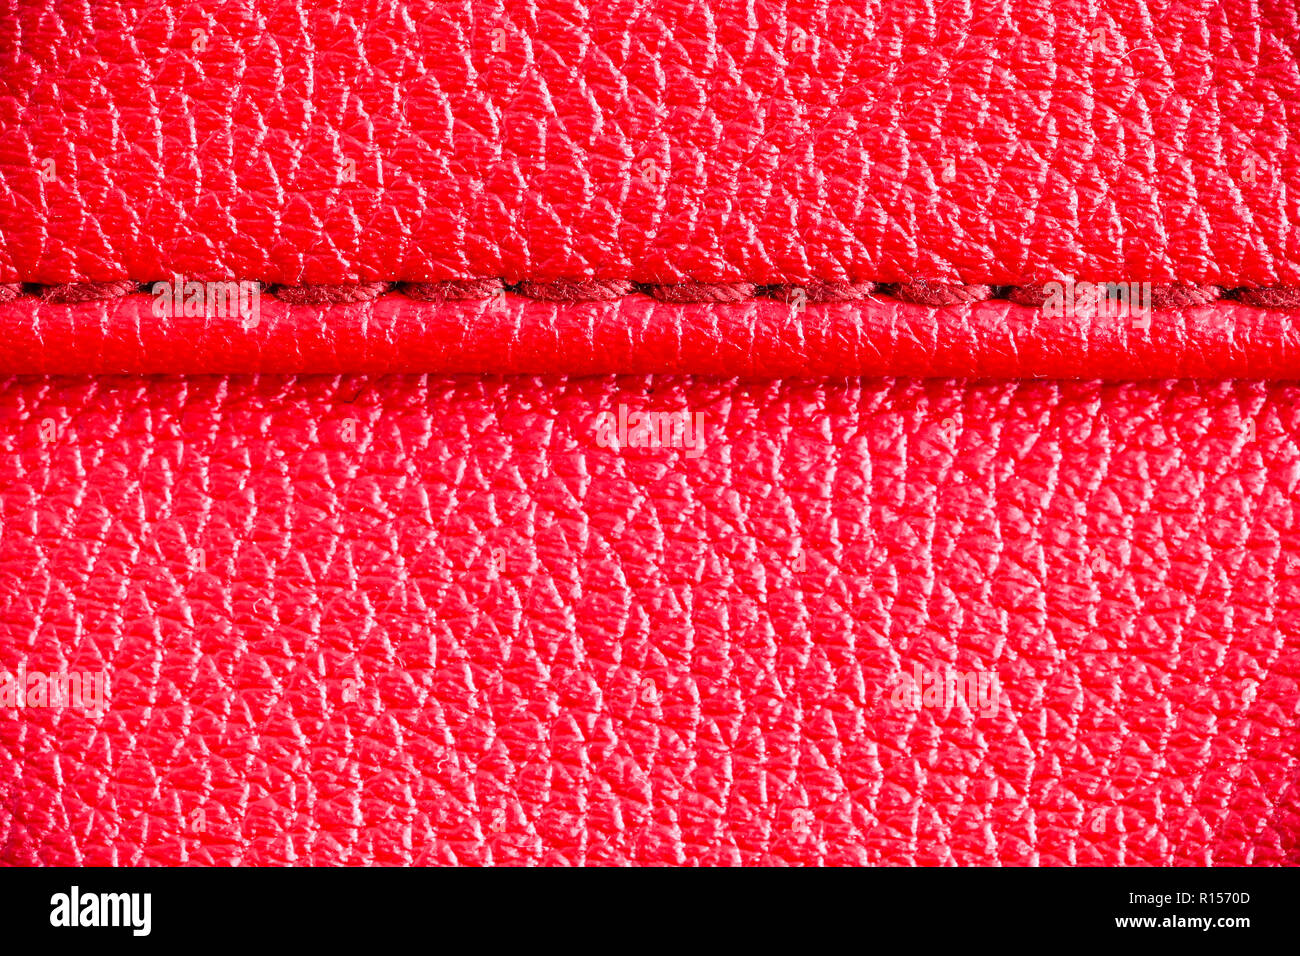 Two layers of red leather textile sewed stitched tightly together under high magnification close detail photography as surface texture background. Stock Photo